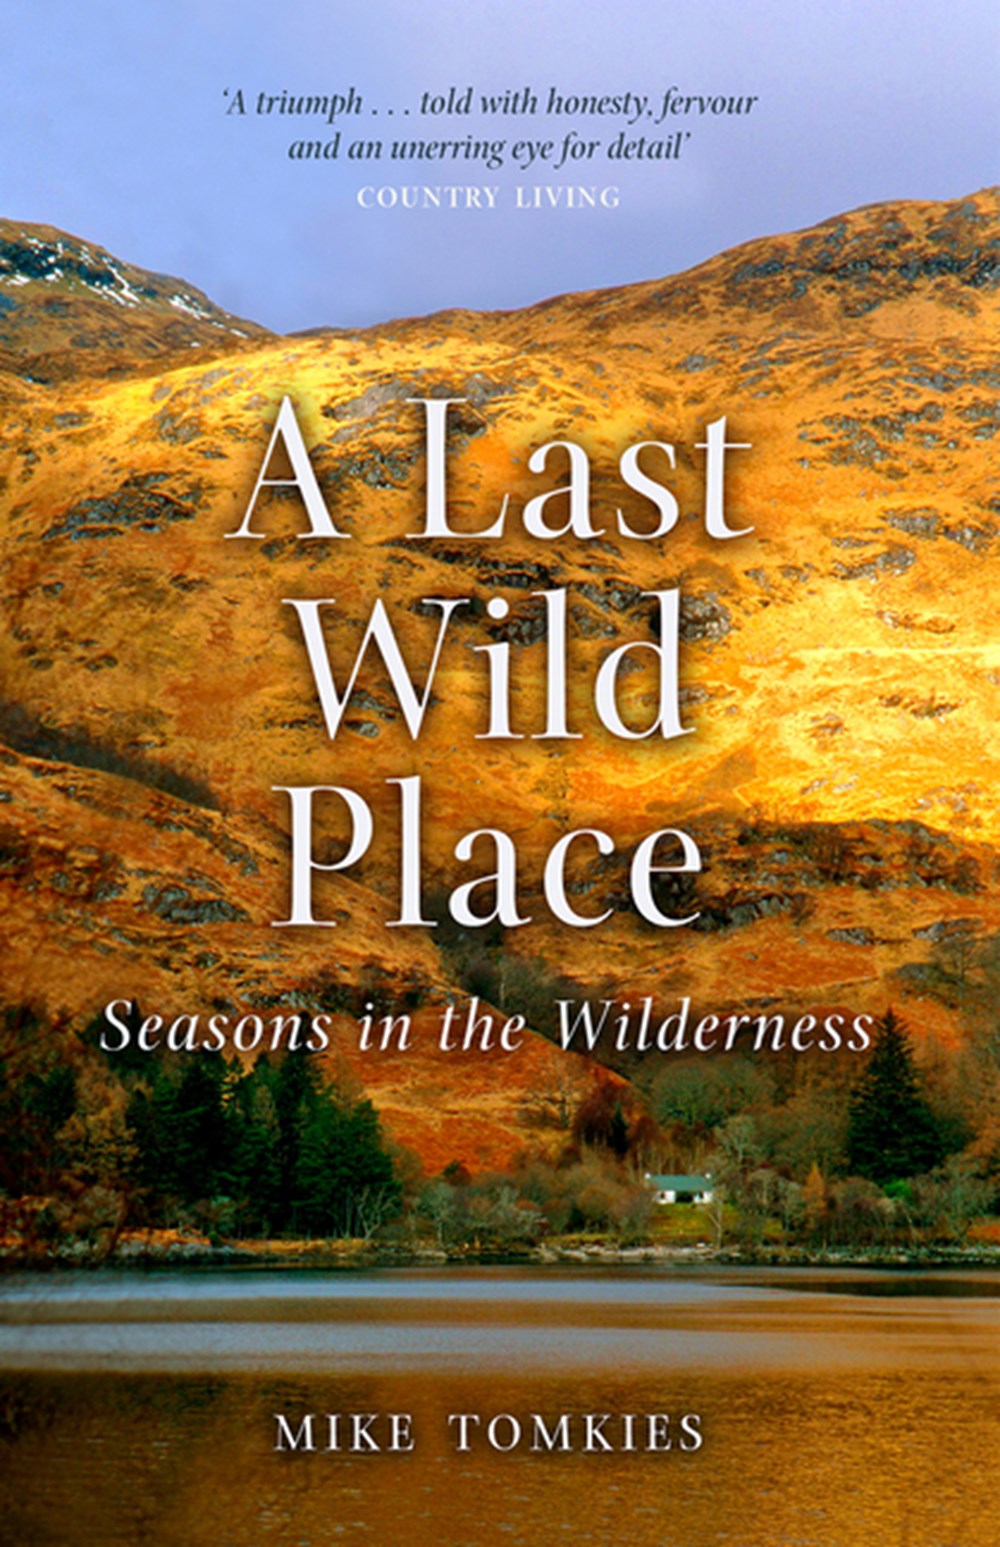 Last Wild Place: Seasons in the Wilderness